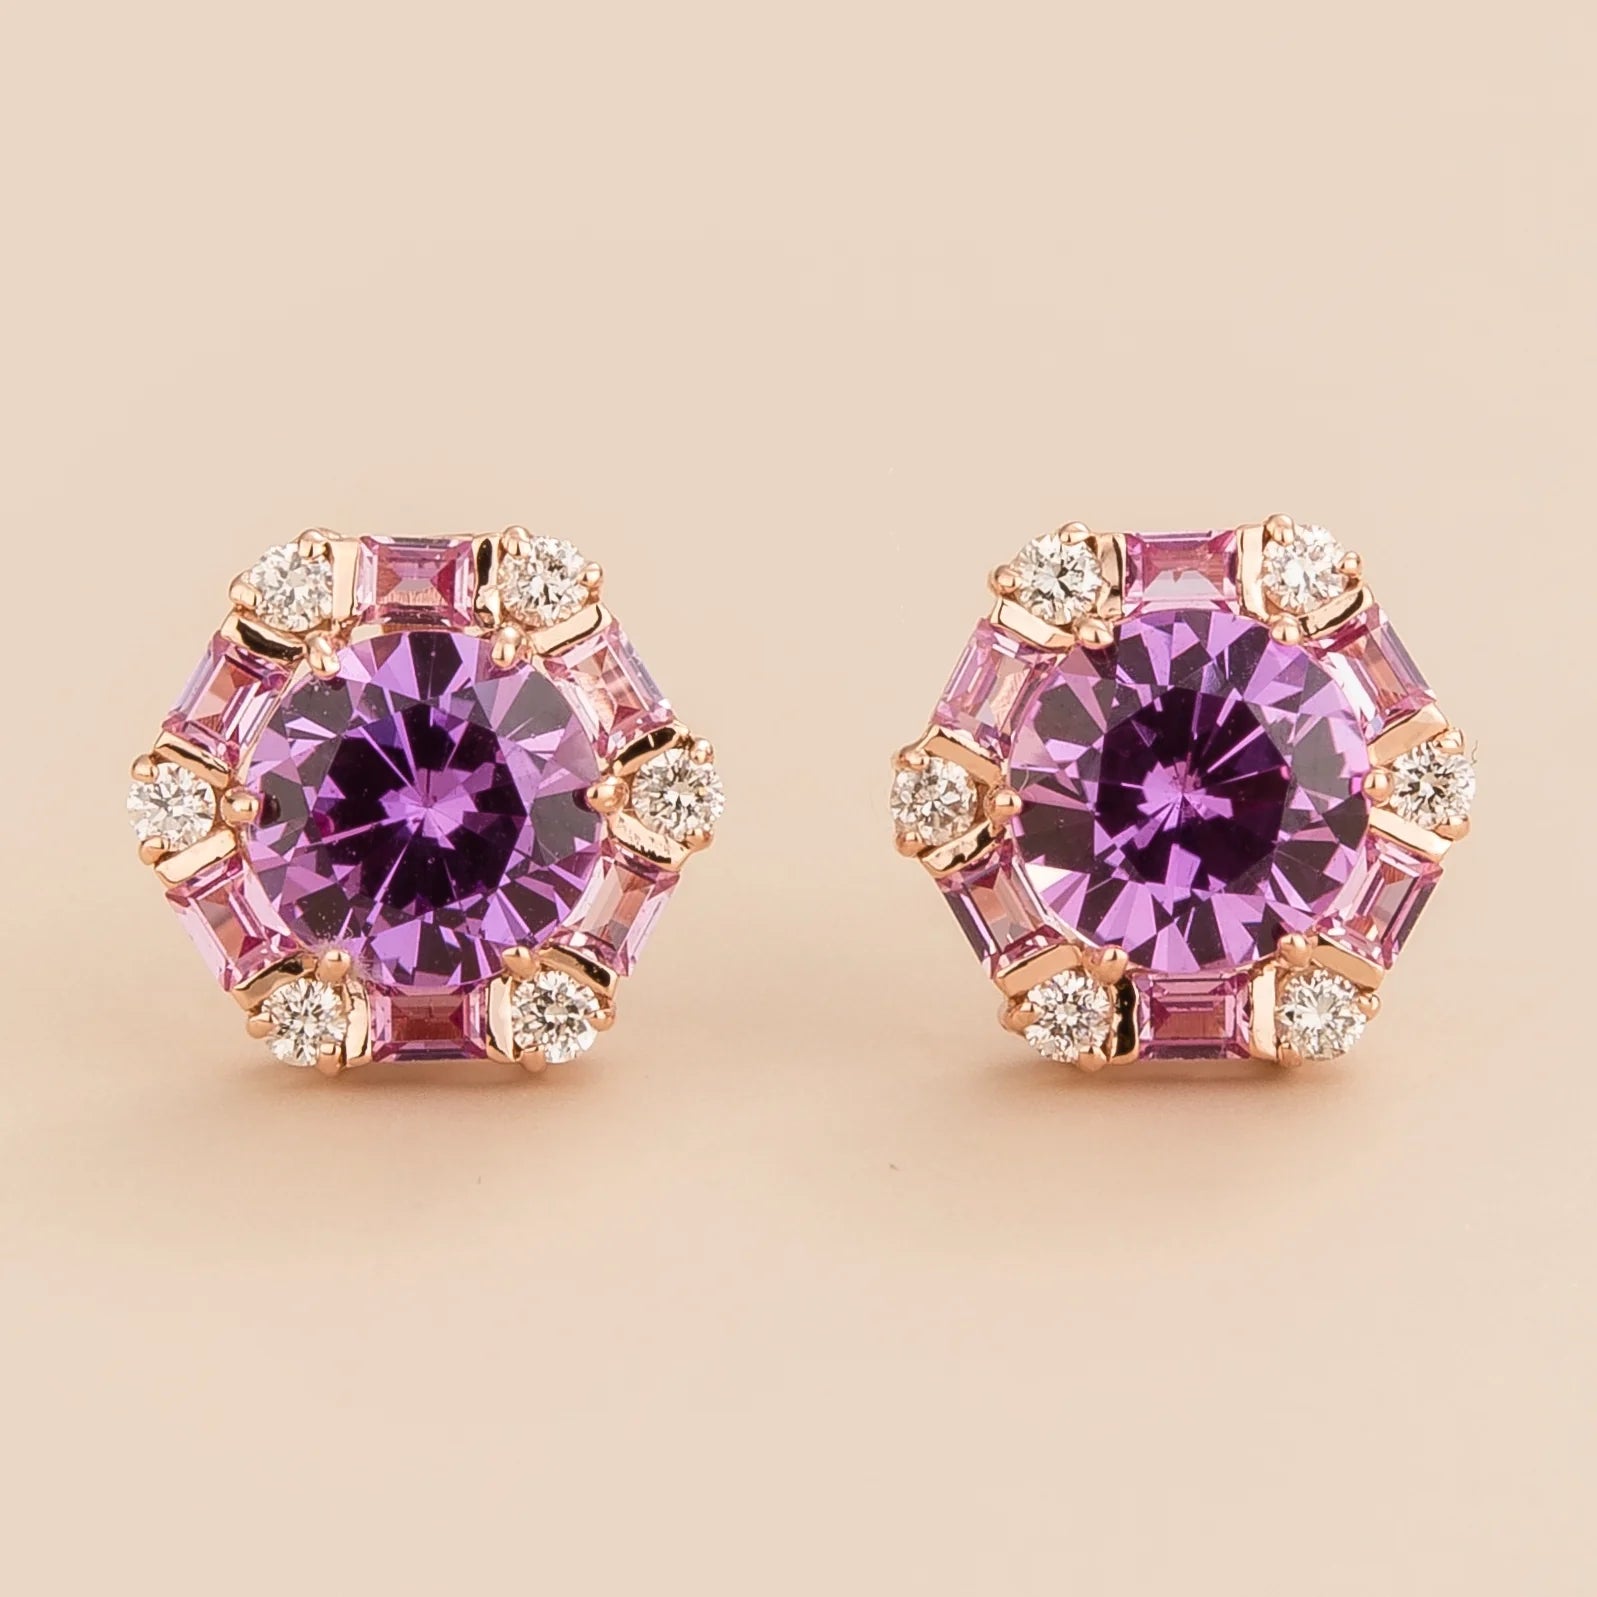 Melba hexagon earrings in 18K pink gold vermeil set with lab grown Purple sapphire, Pink sapphire and Diamond gem stones. Perfect for yourself and as gift.